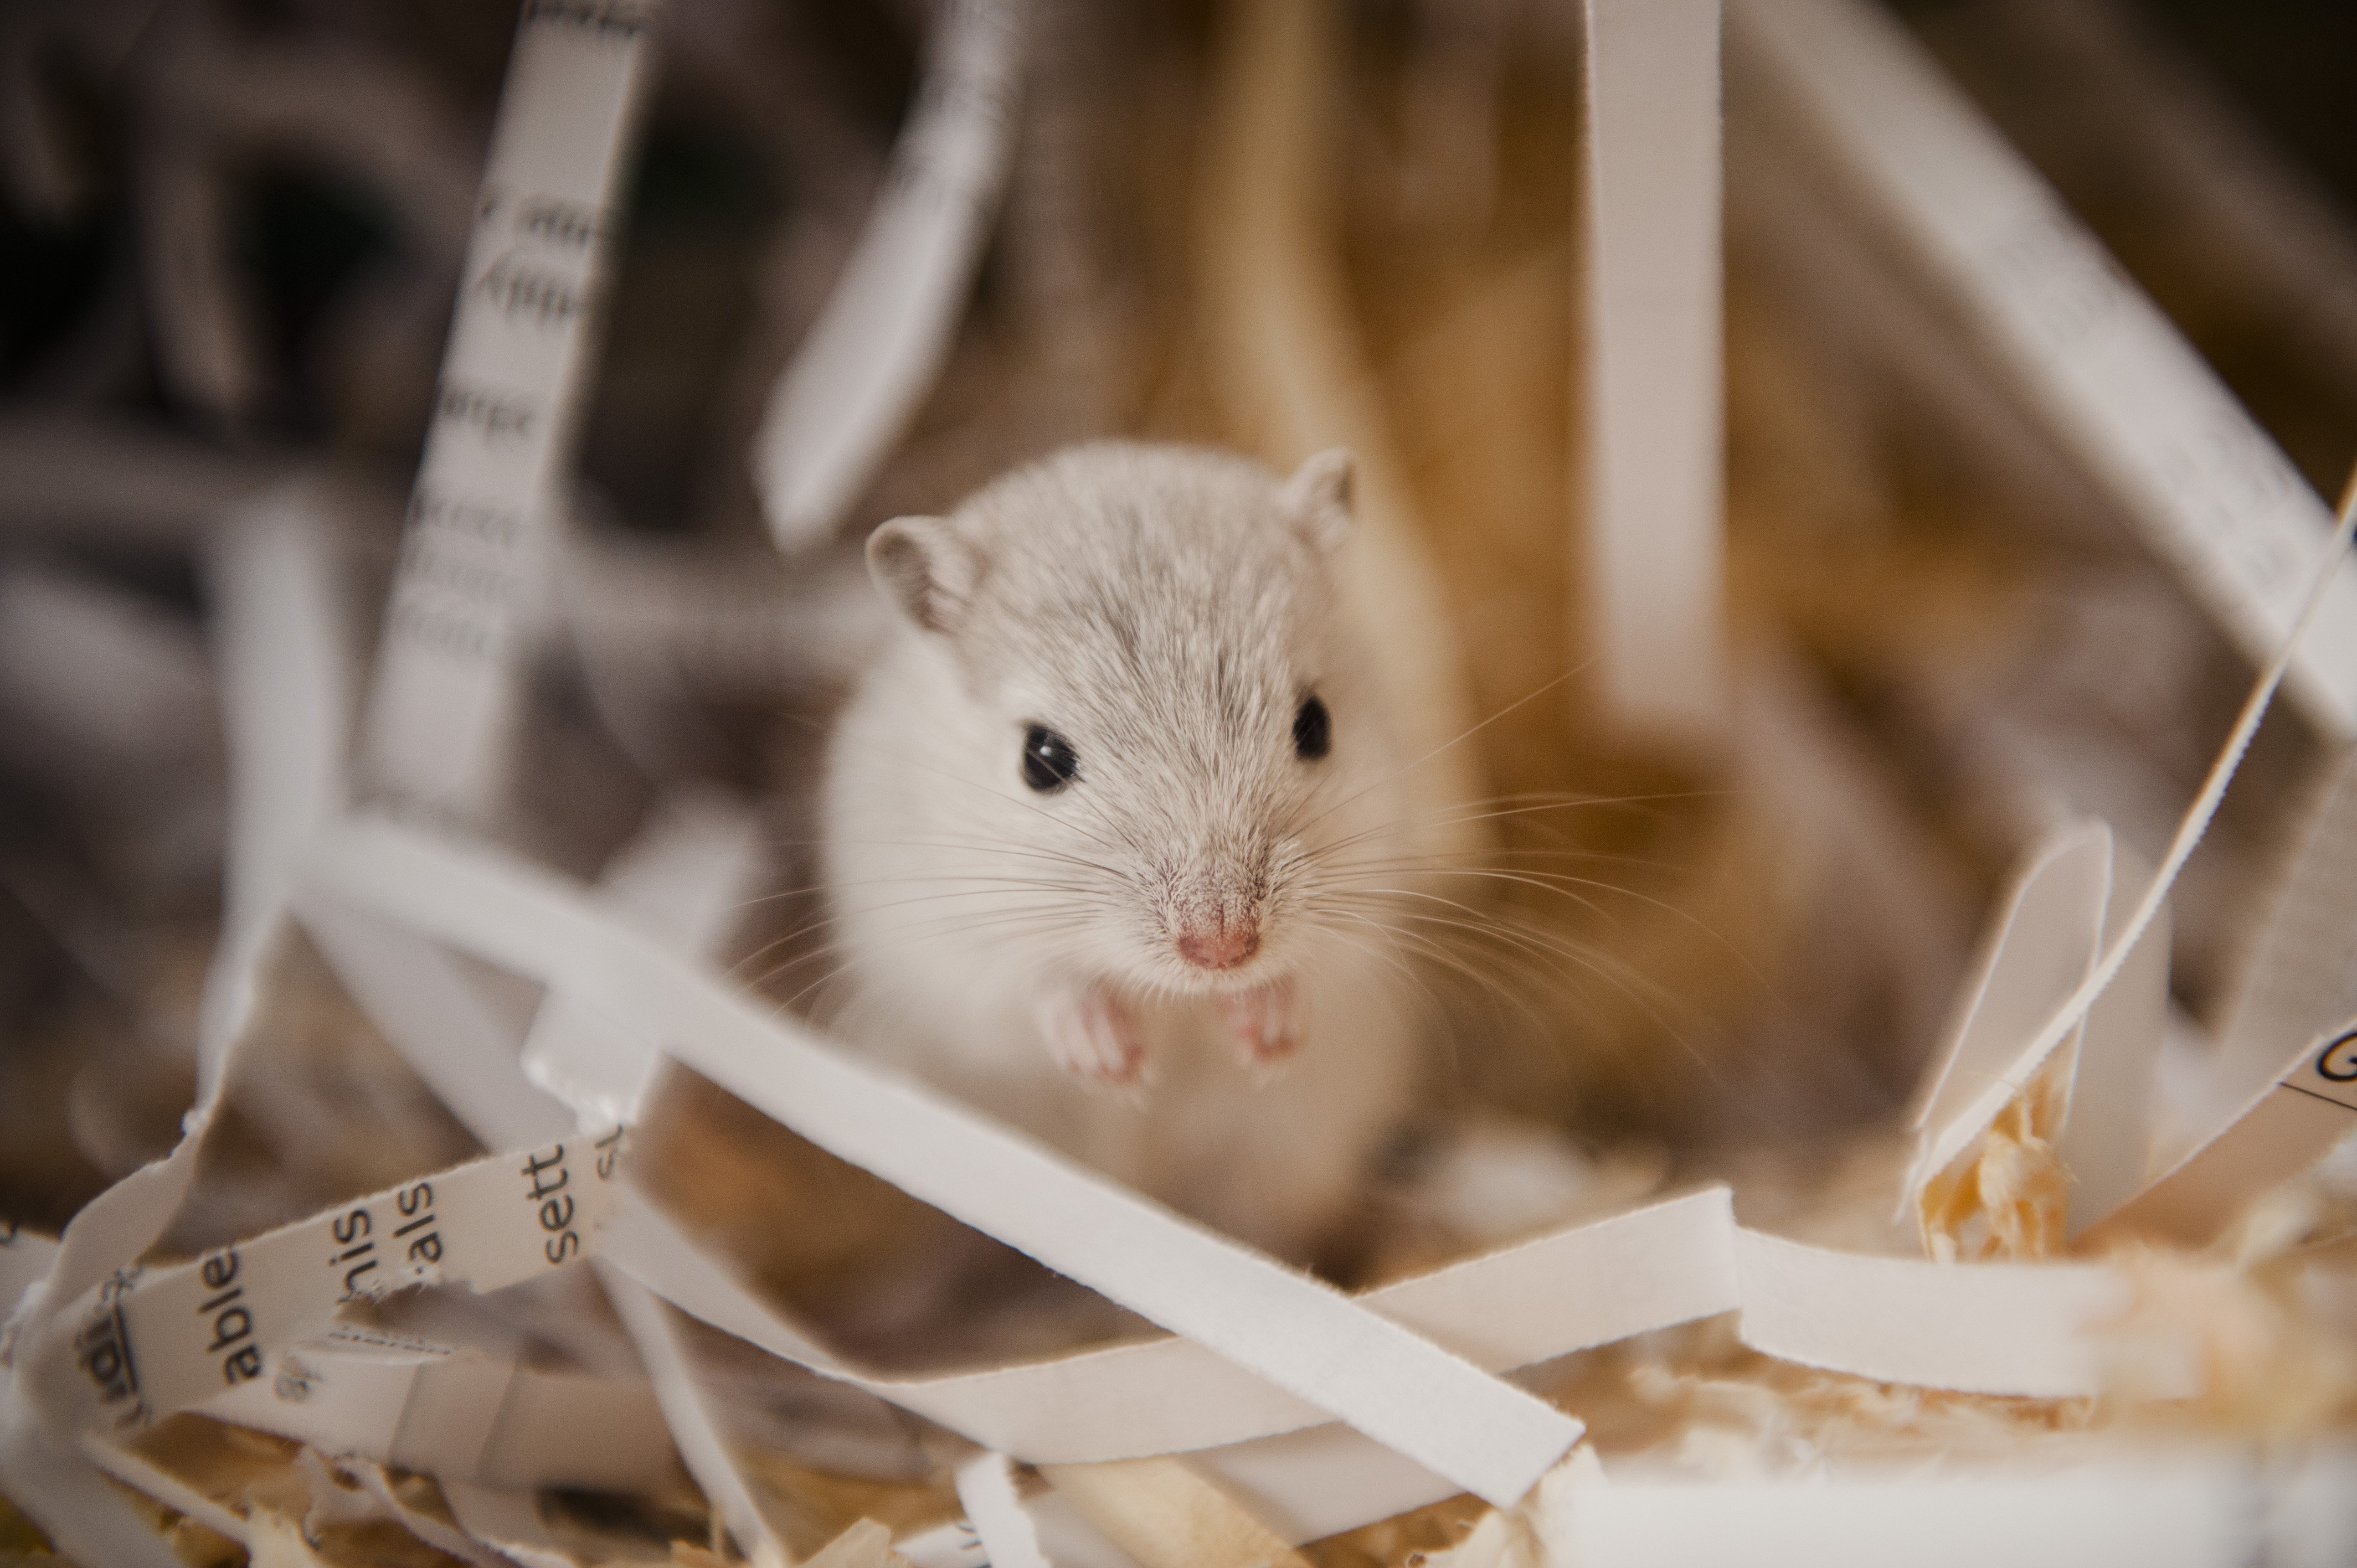 A grey gerbil sits surrounded by shredded newspaper in their accommodation.